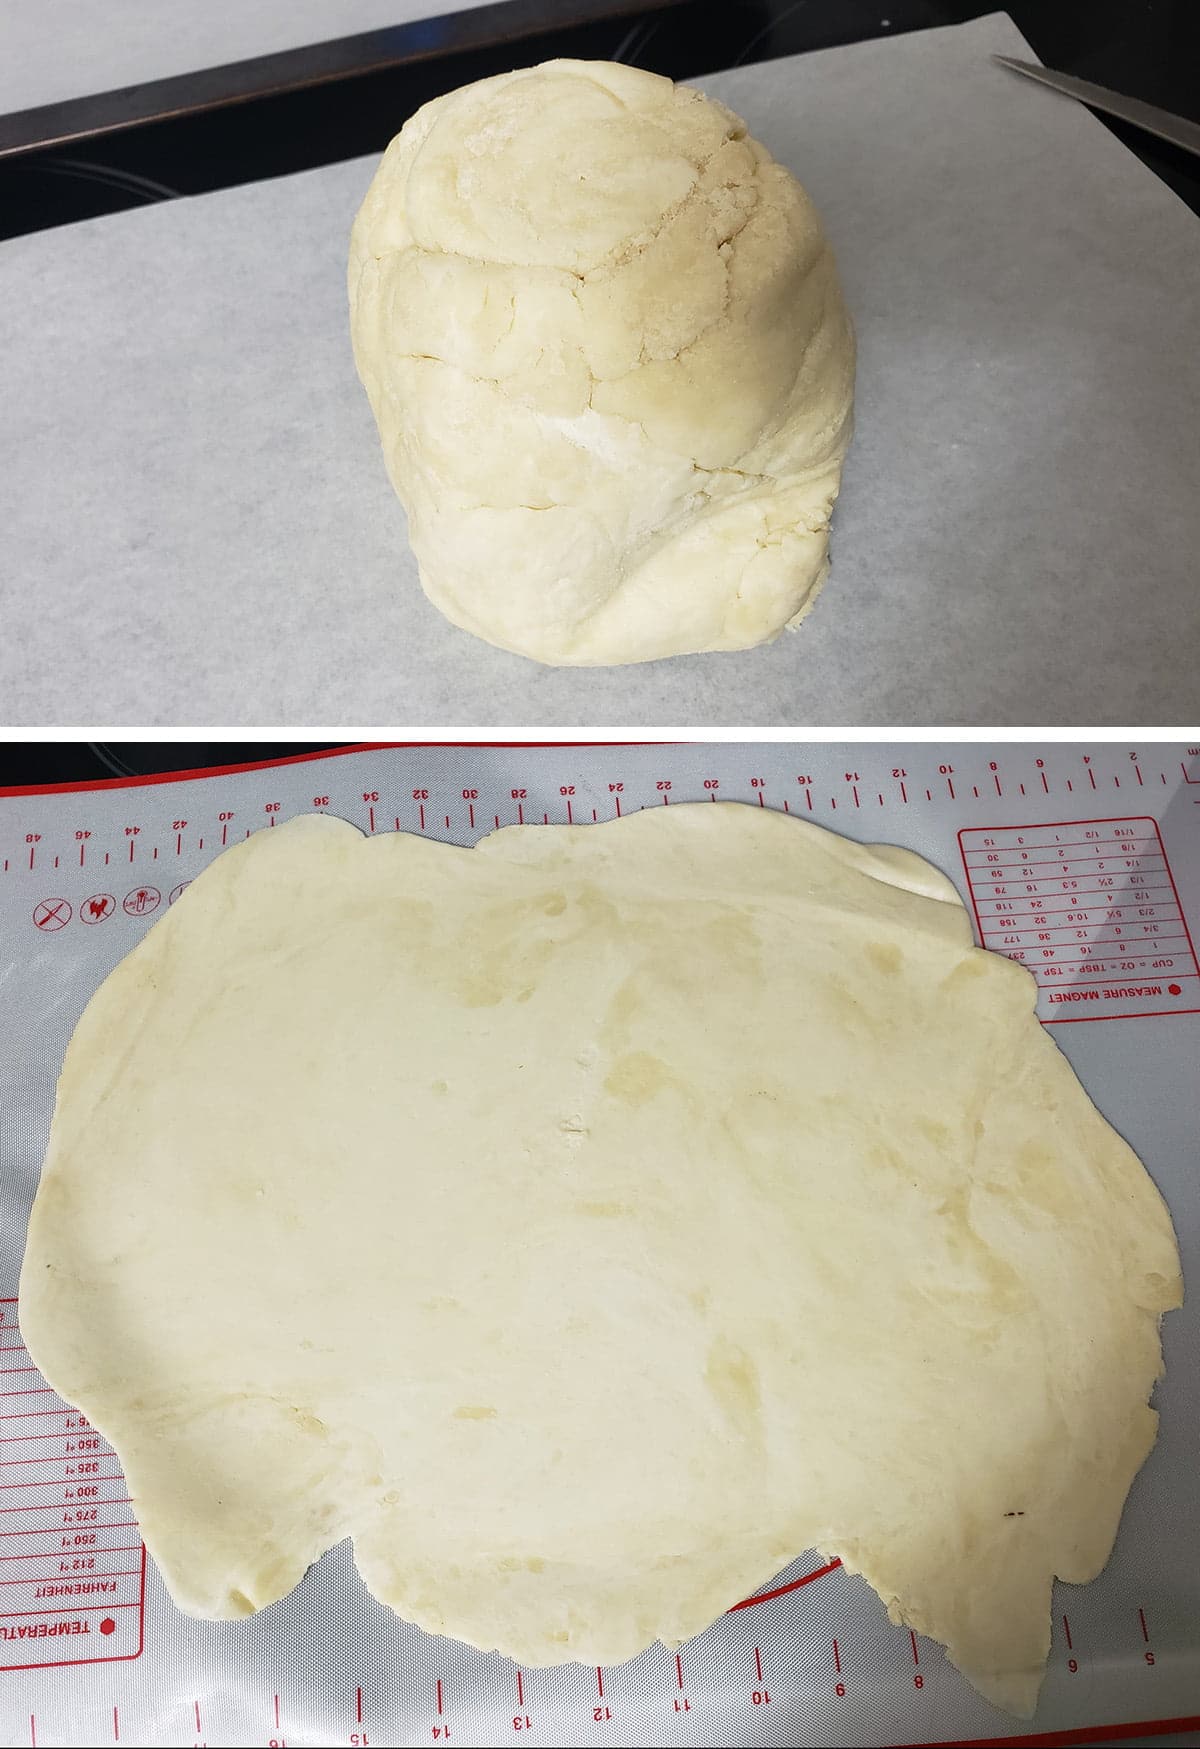 A two part compilation image, showing a ball of dough, then that ball of dough rolled out.